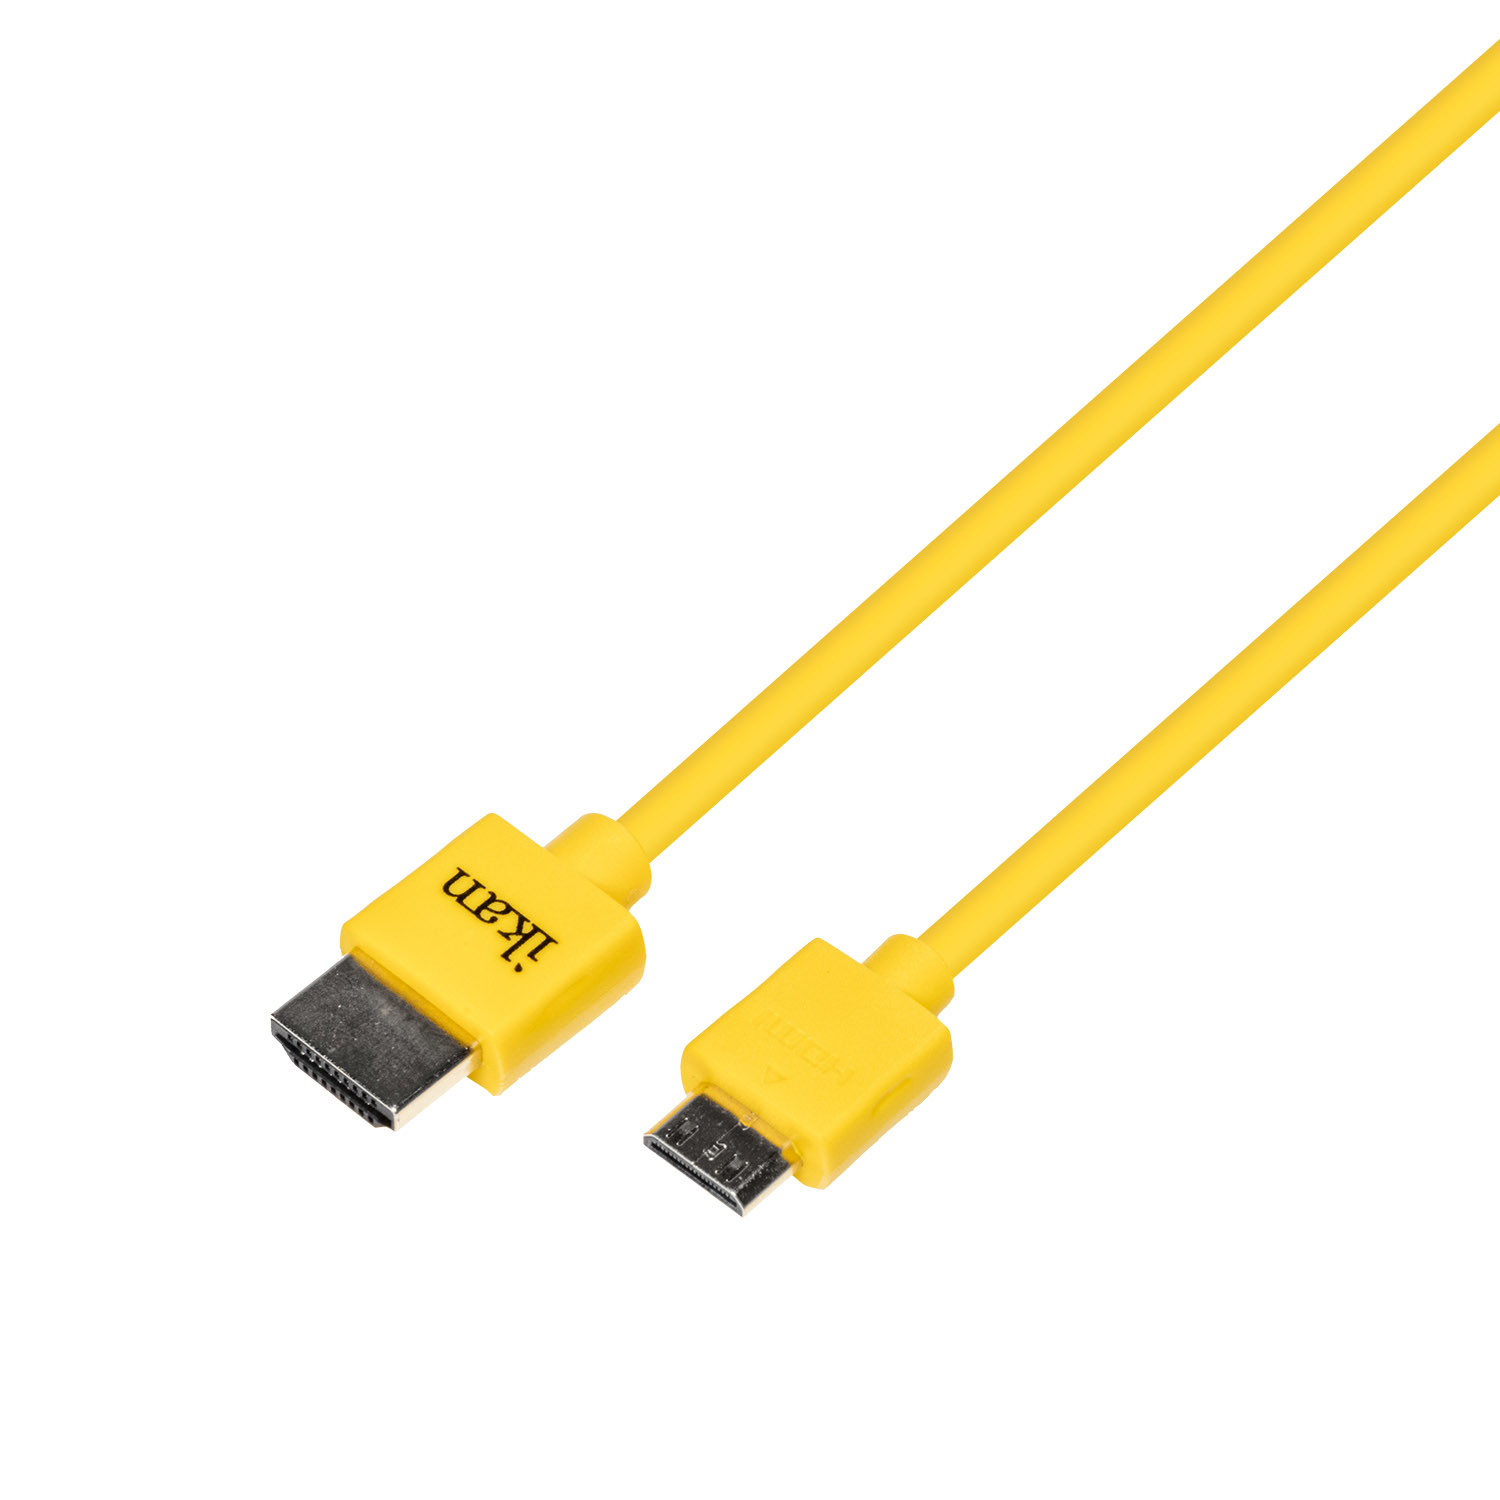 Slim HDMI Cable w/ v1.4 HD 4K Support to Standard) -